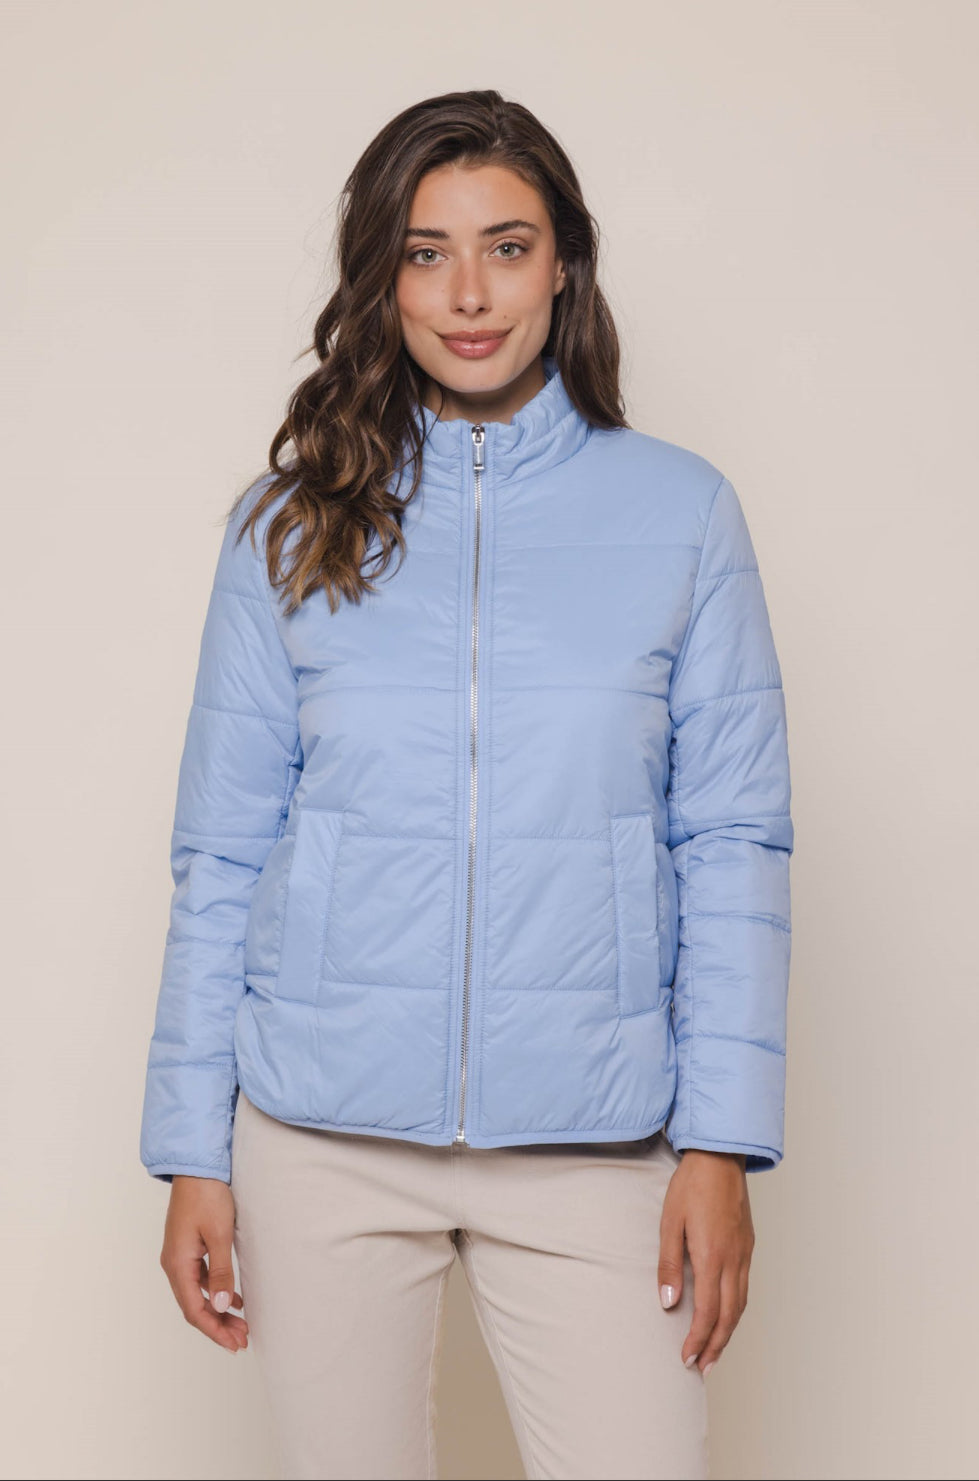 Rino & Pelle Jacke , Mads.col airy blue